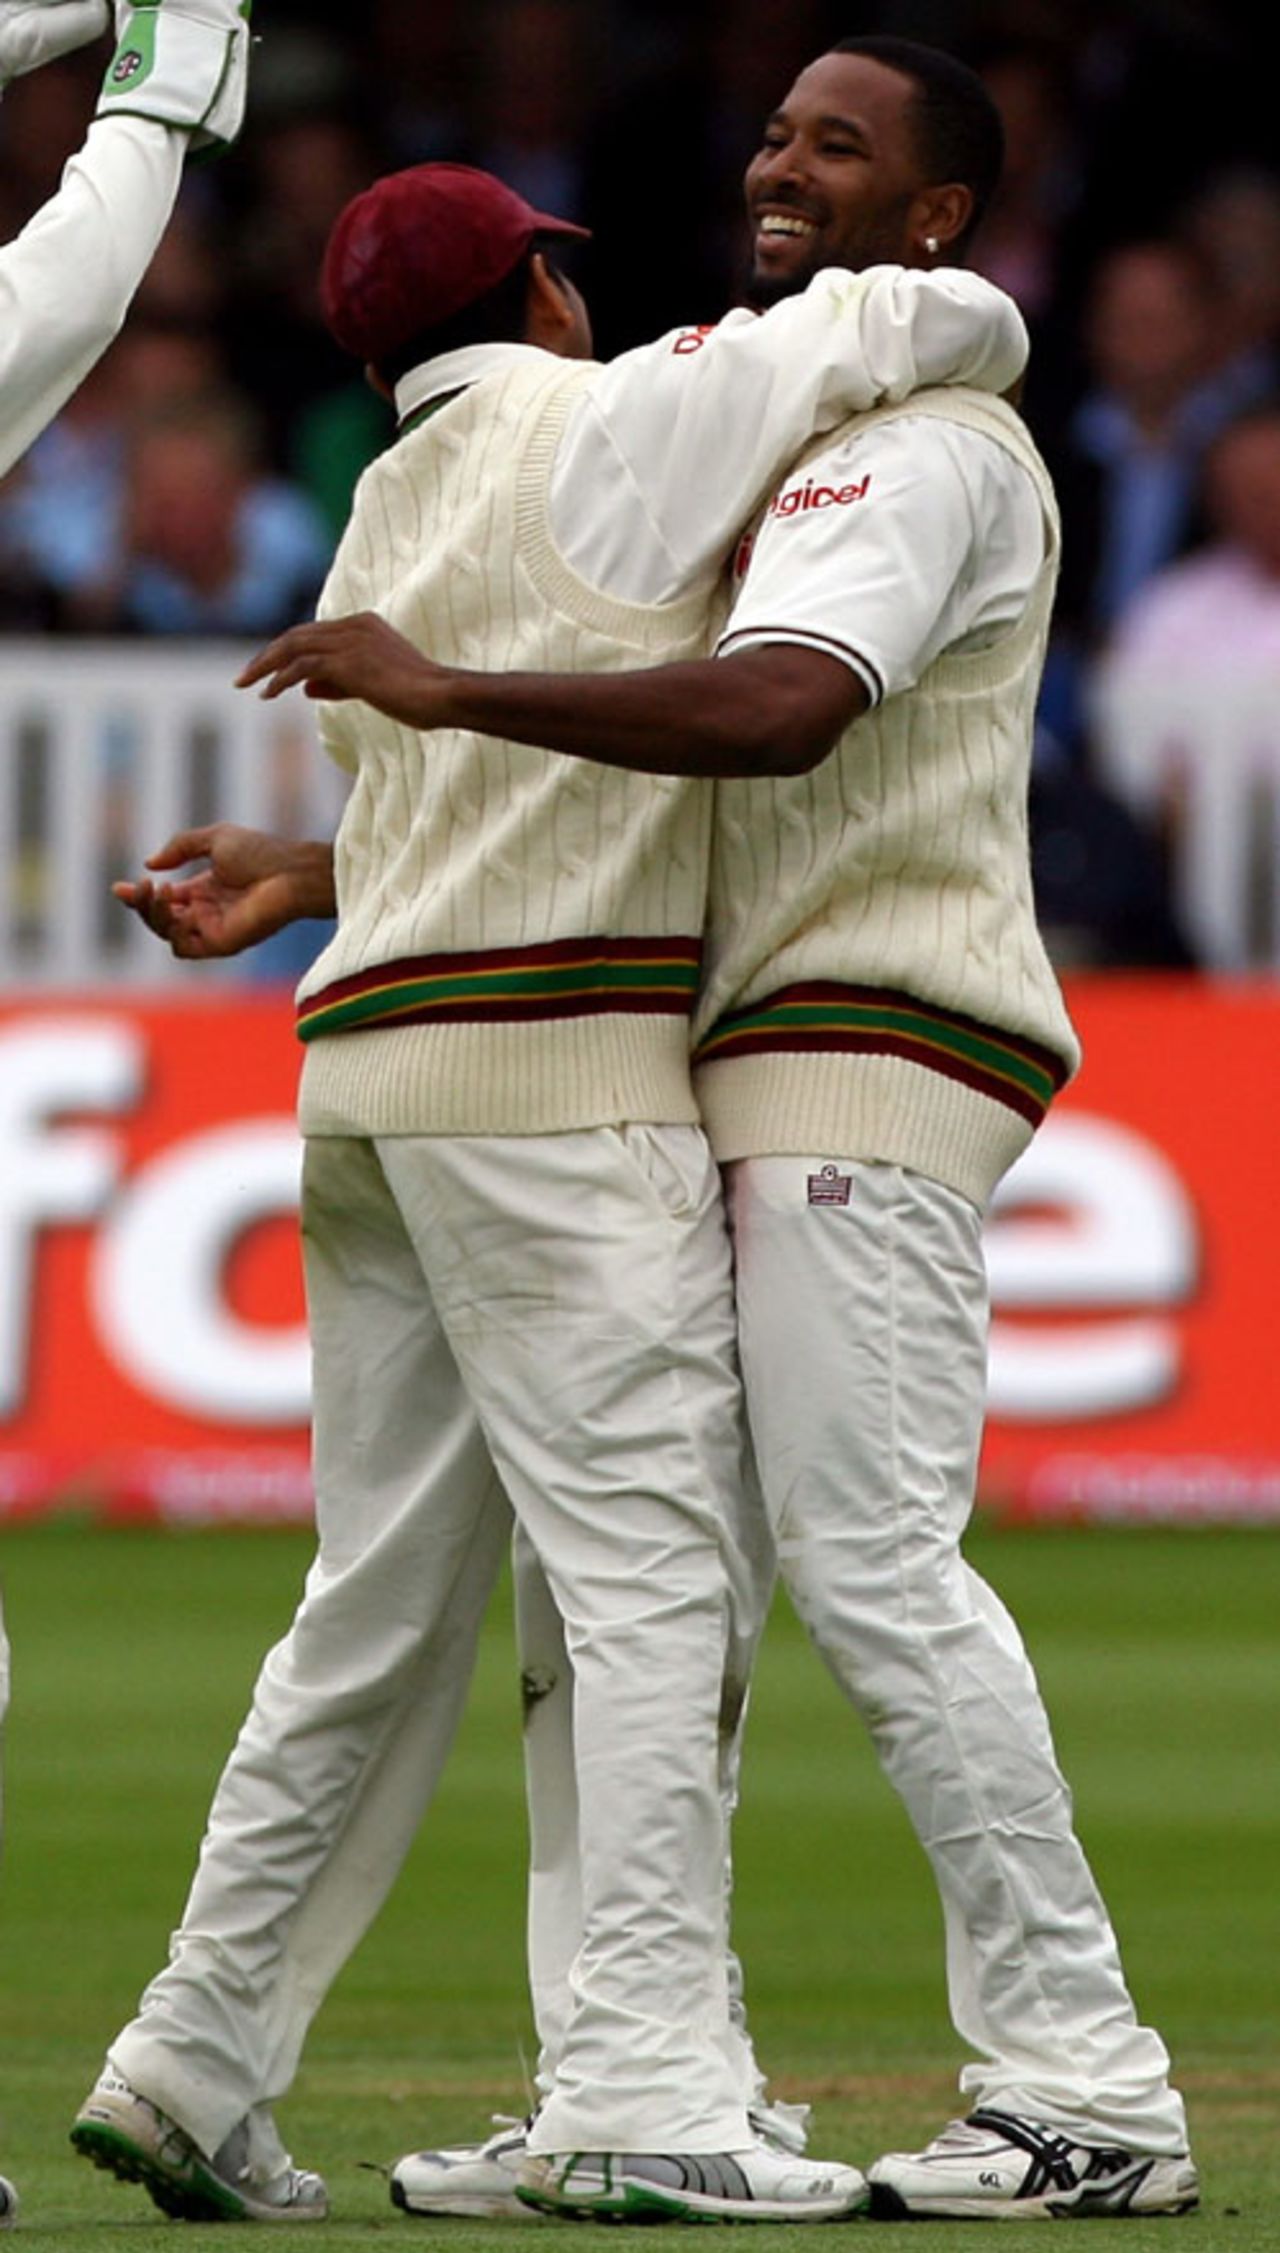 Corey Collymore celebrates dismissing Kevin Pietersen, England v West Indies, 1st Test, Lord's, May 17, 2007